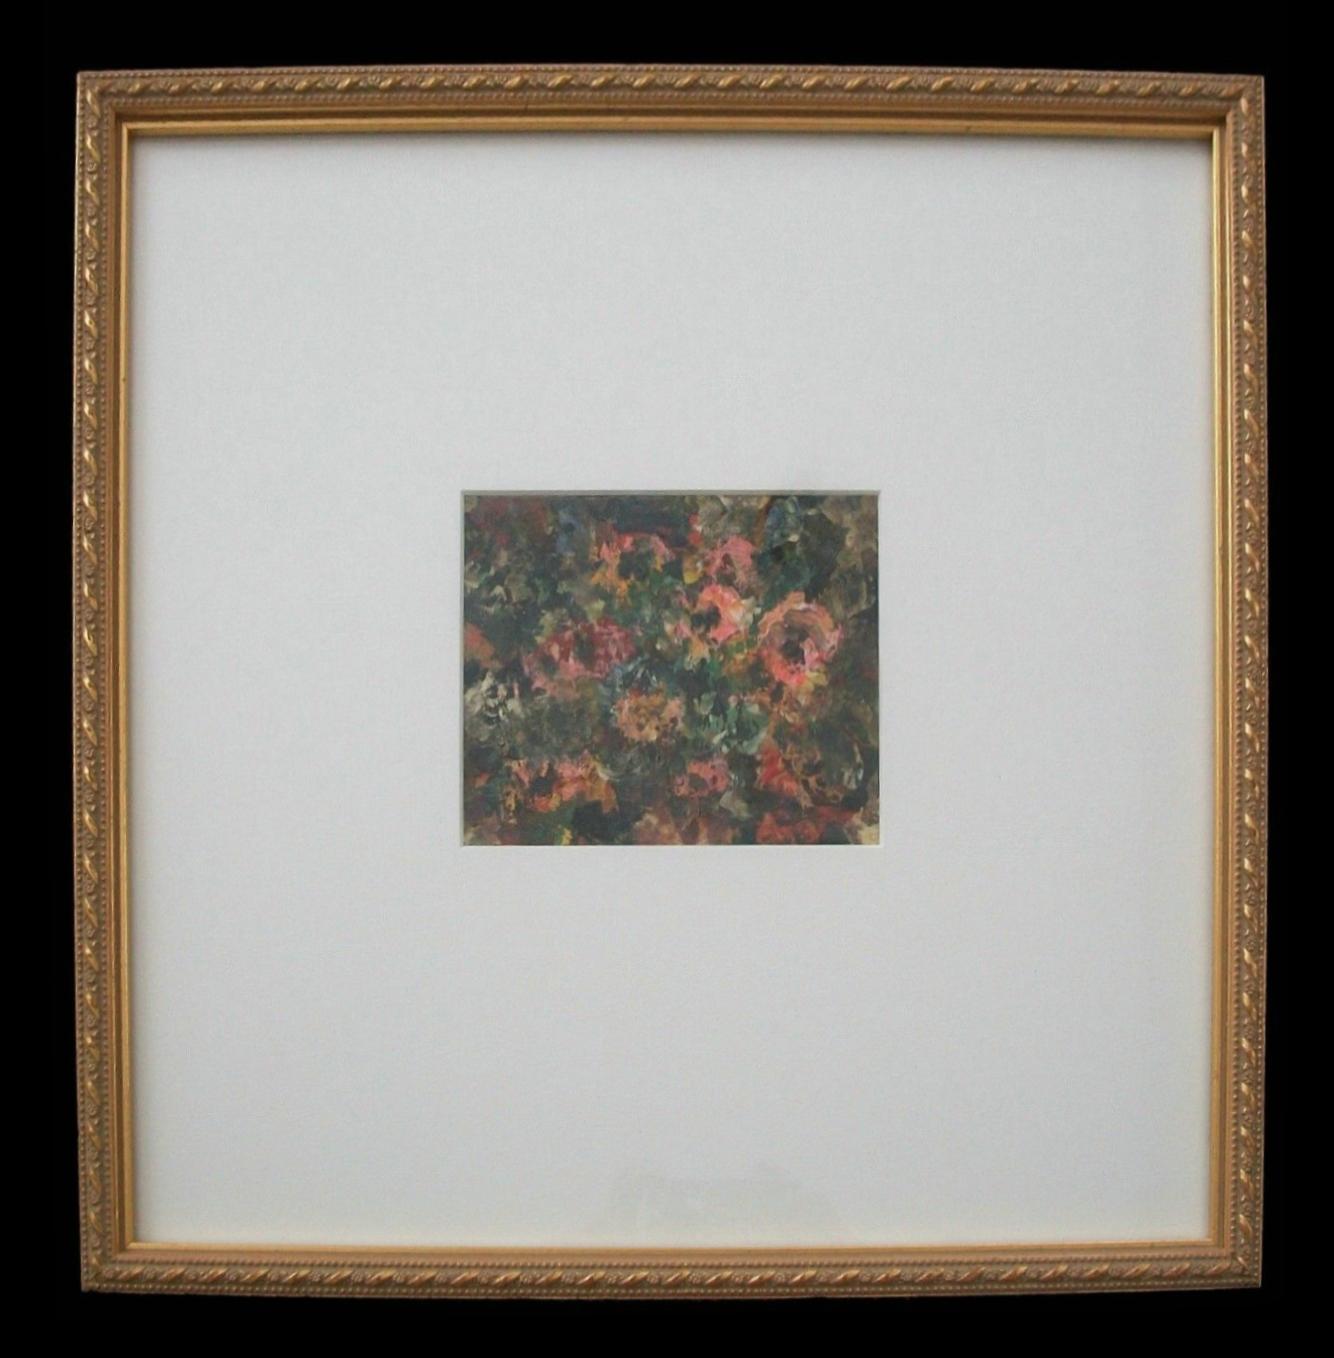 ELMO MARSHALL - 'An English Garden' - Vintage Impressionist 'palette' oil painting - vintage gold gilt wood frame - finished with a single matte board with glass - signed/titled/dated verso - Canada - circa 1970. 

Excellent vintage condition -